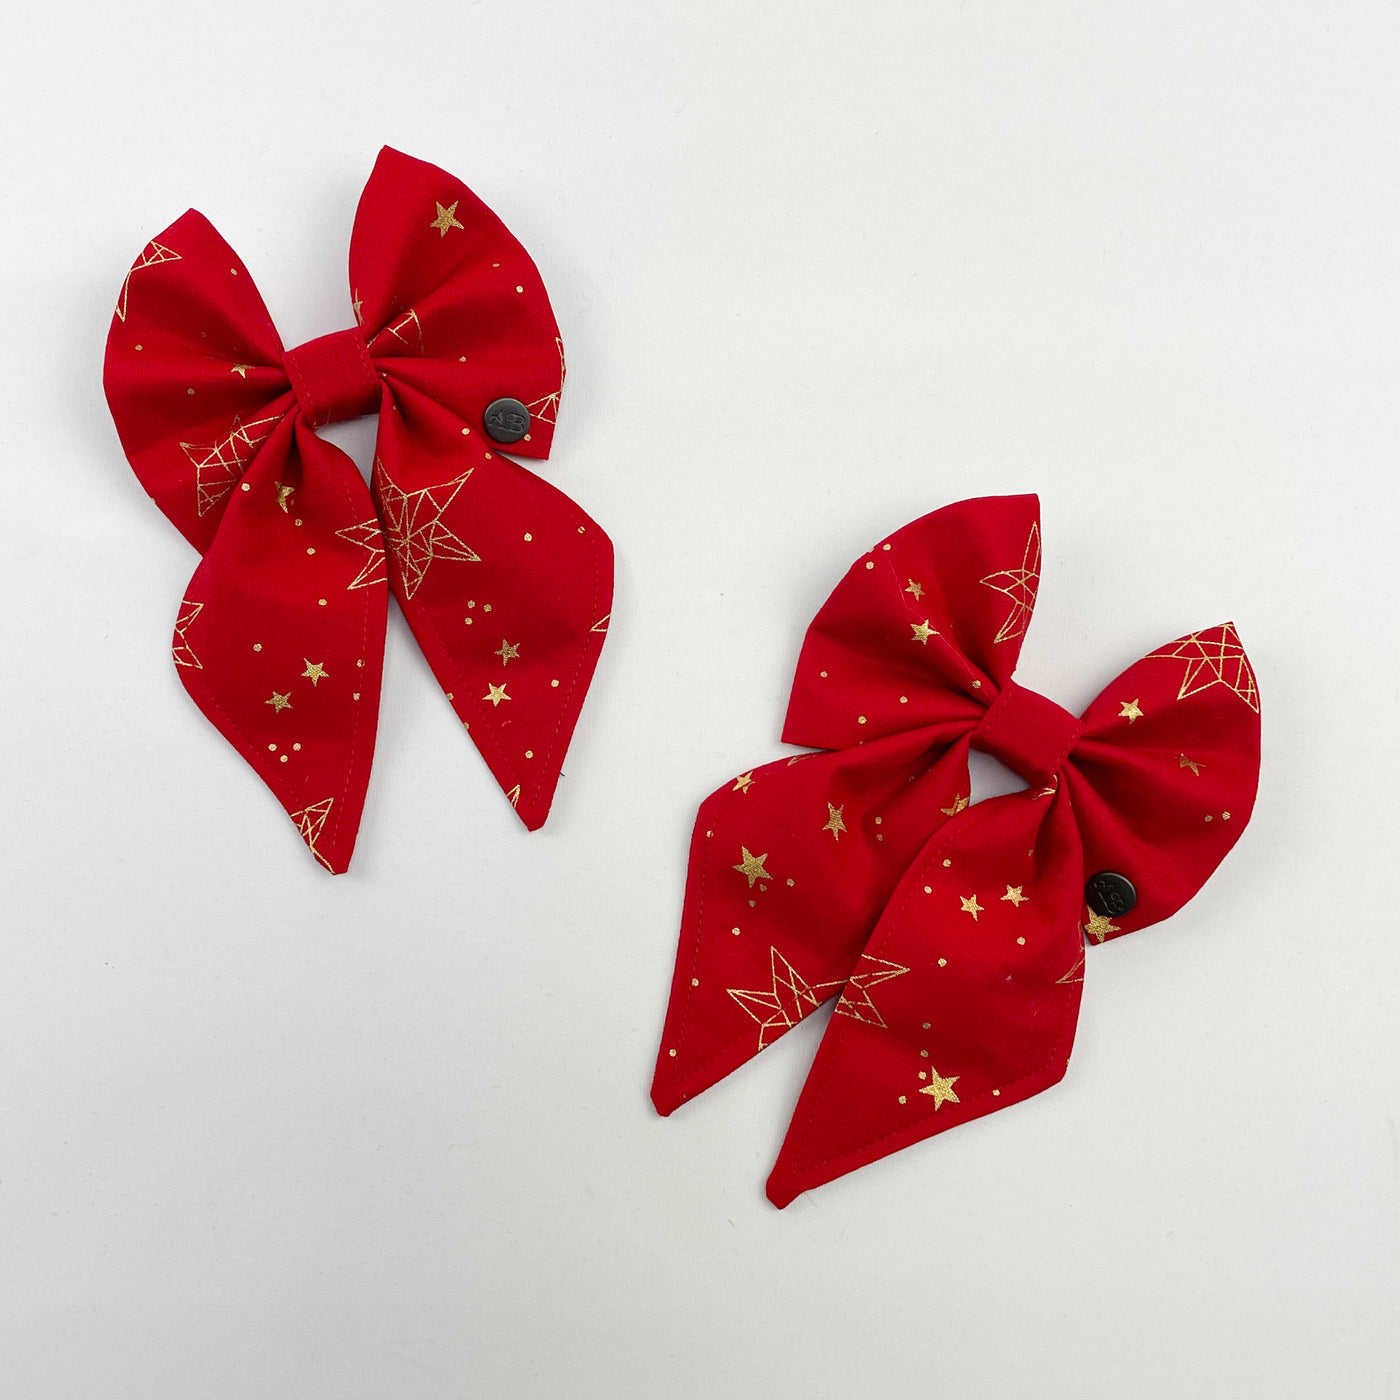 Two Red star sailor bow ties